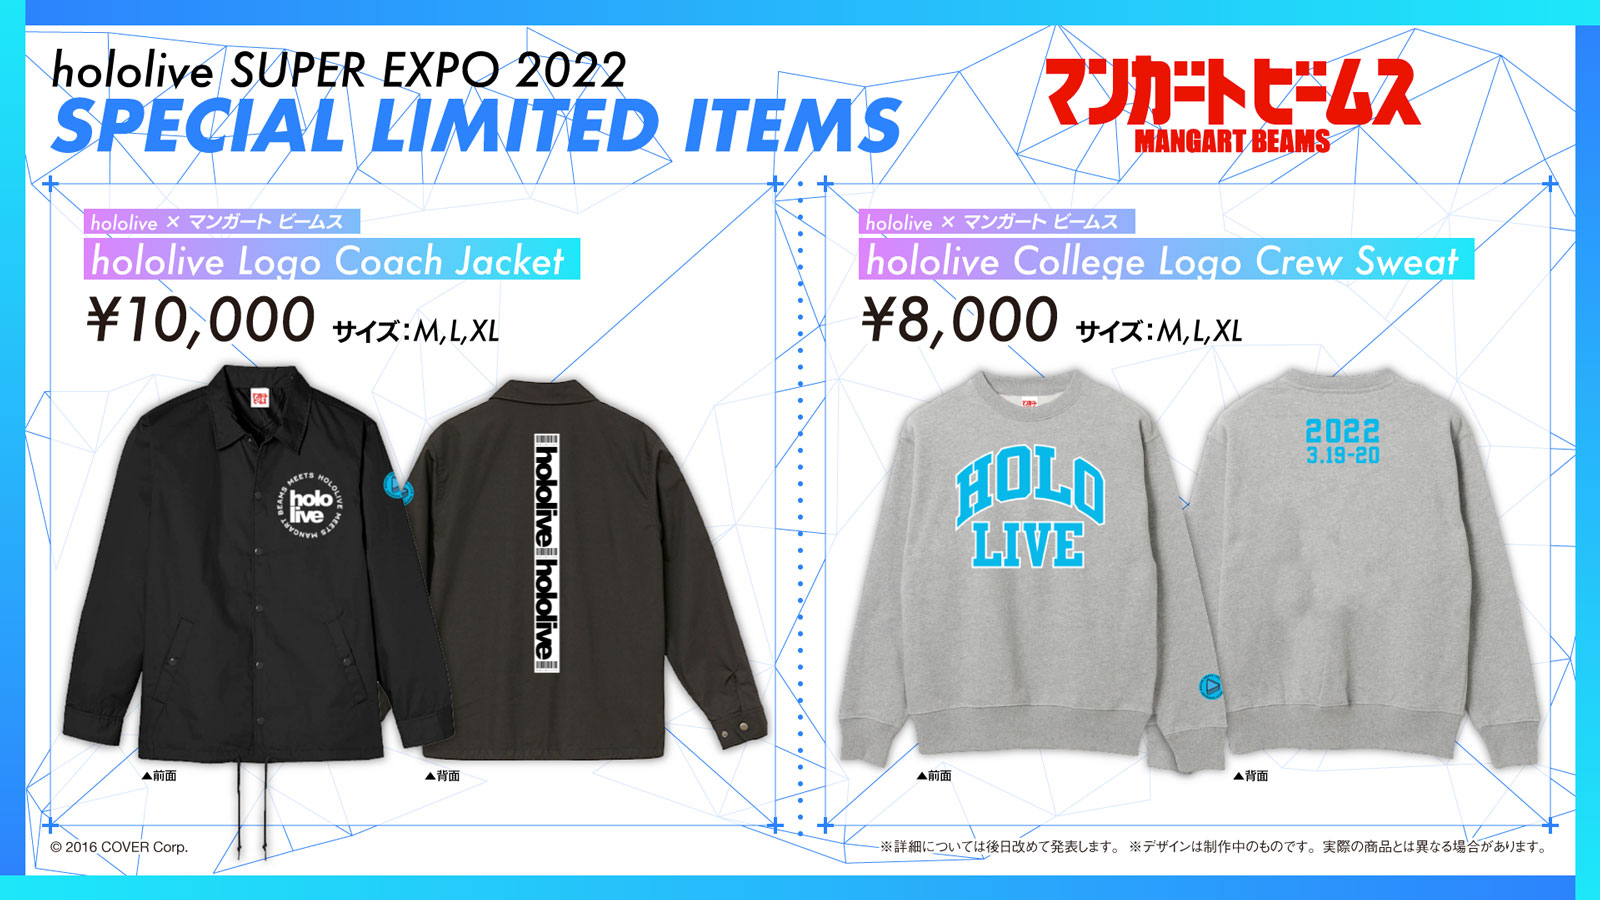 GOODS | hololive SUPER EXPO 2022 & hololive 3rd fes. Link Your 